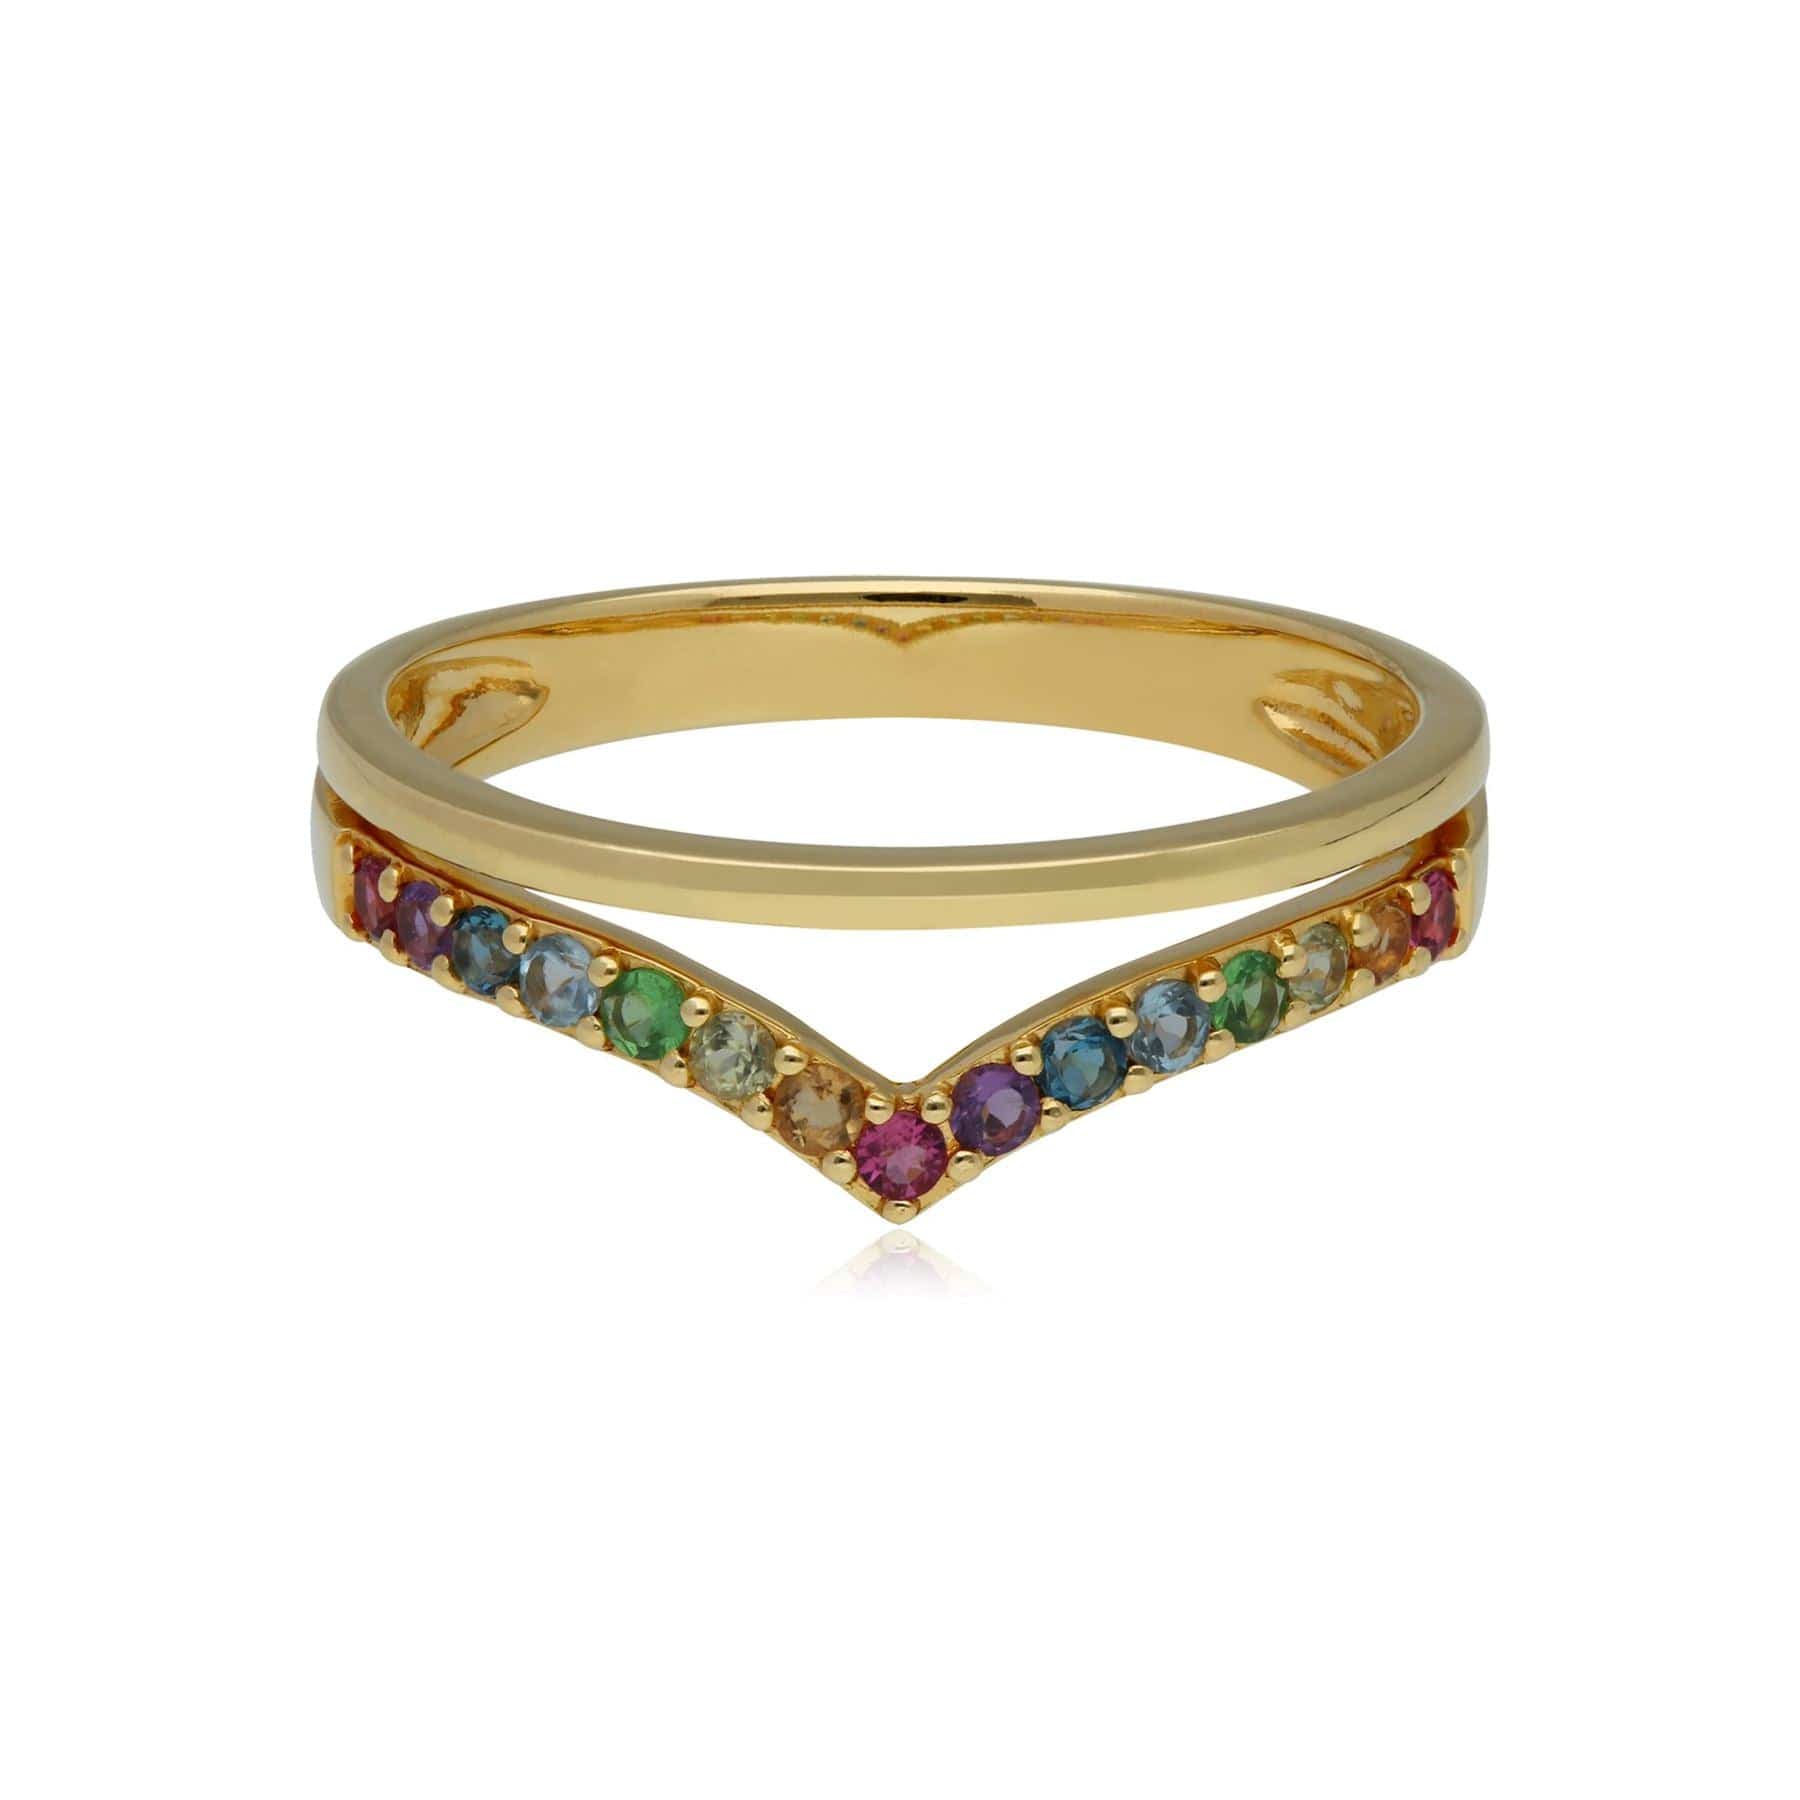 Rainbow Wishbone Style Ring in Gold Plated Sterling Silver